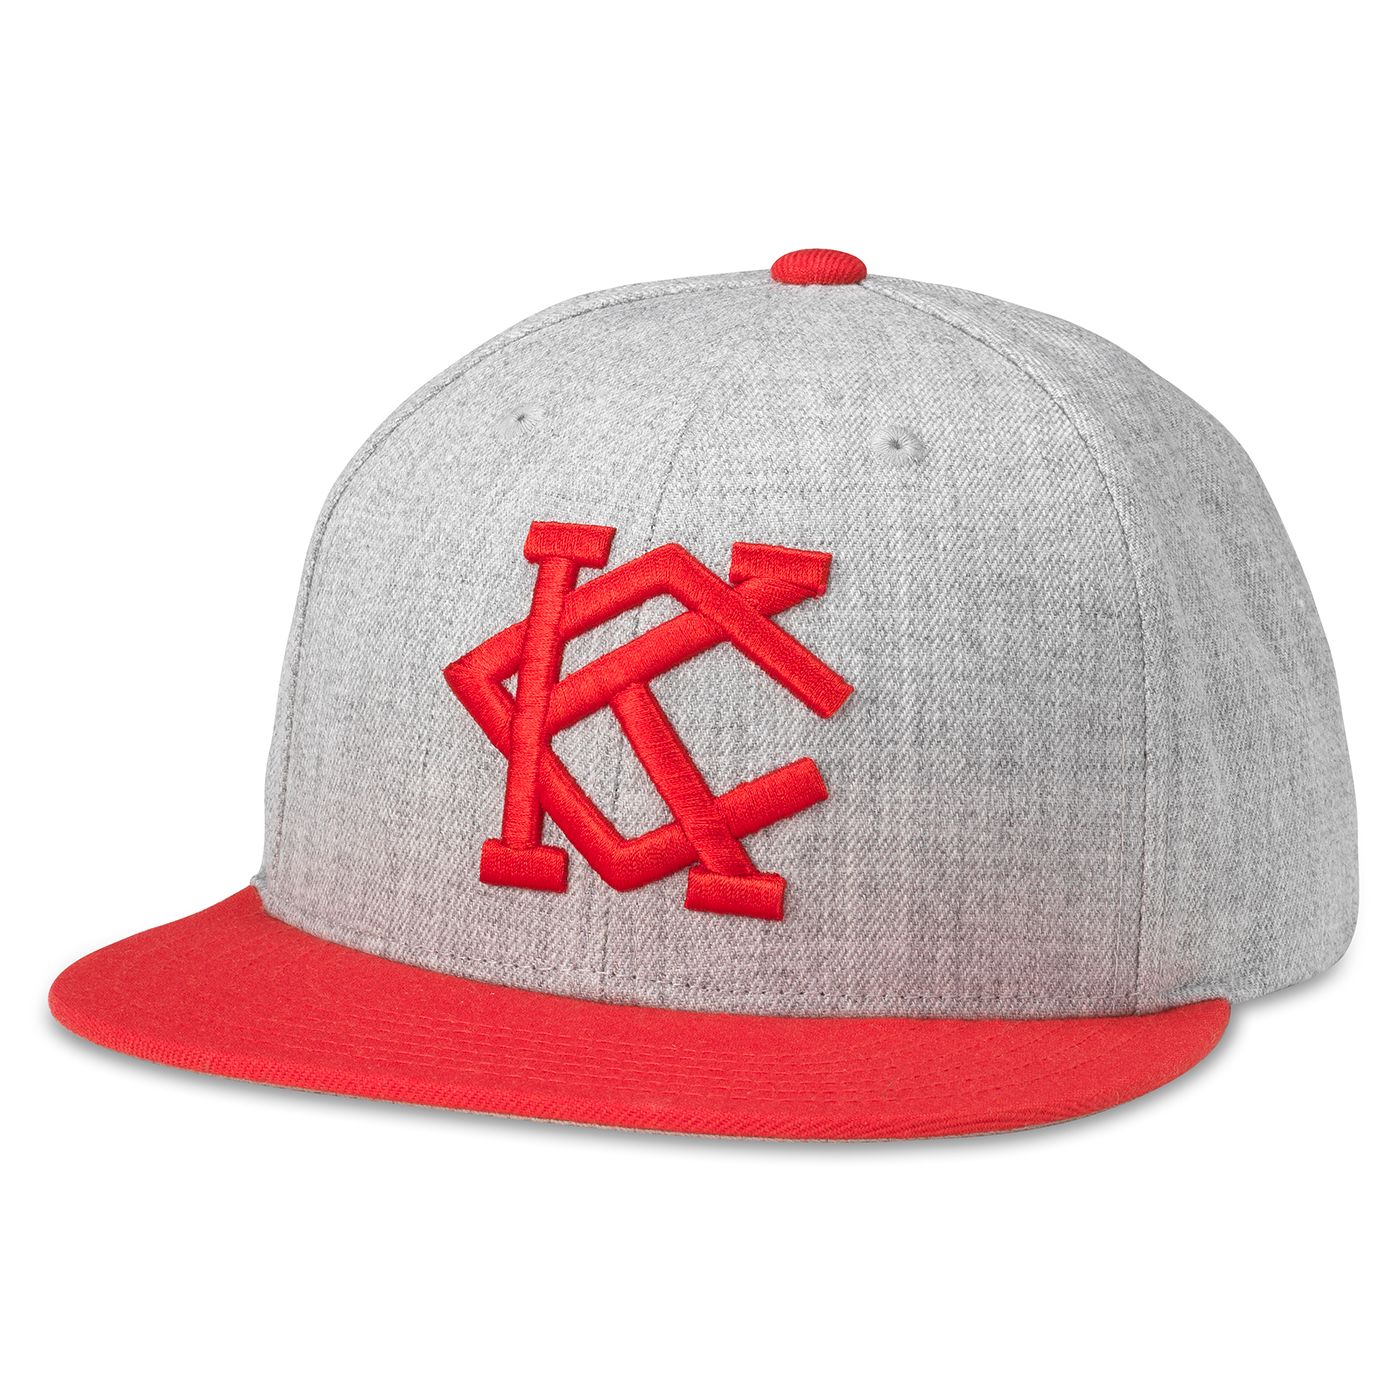 KC All Nations Archive 400 Hat